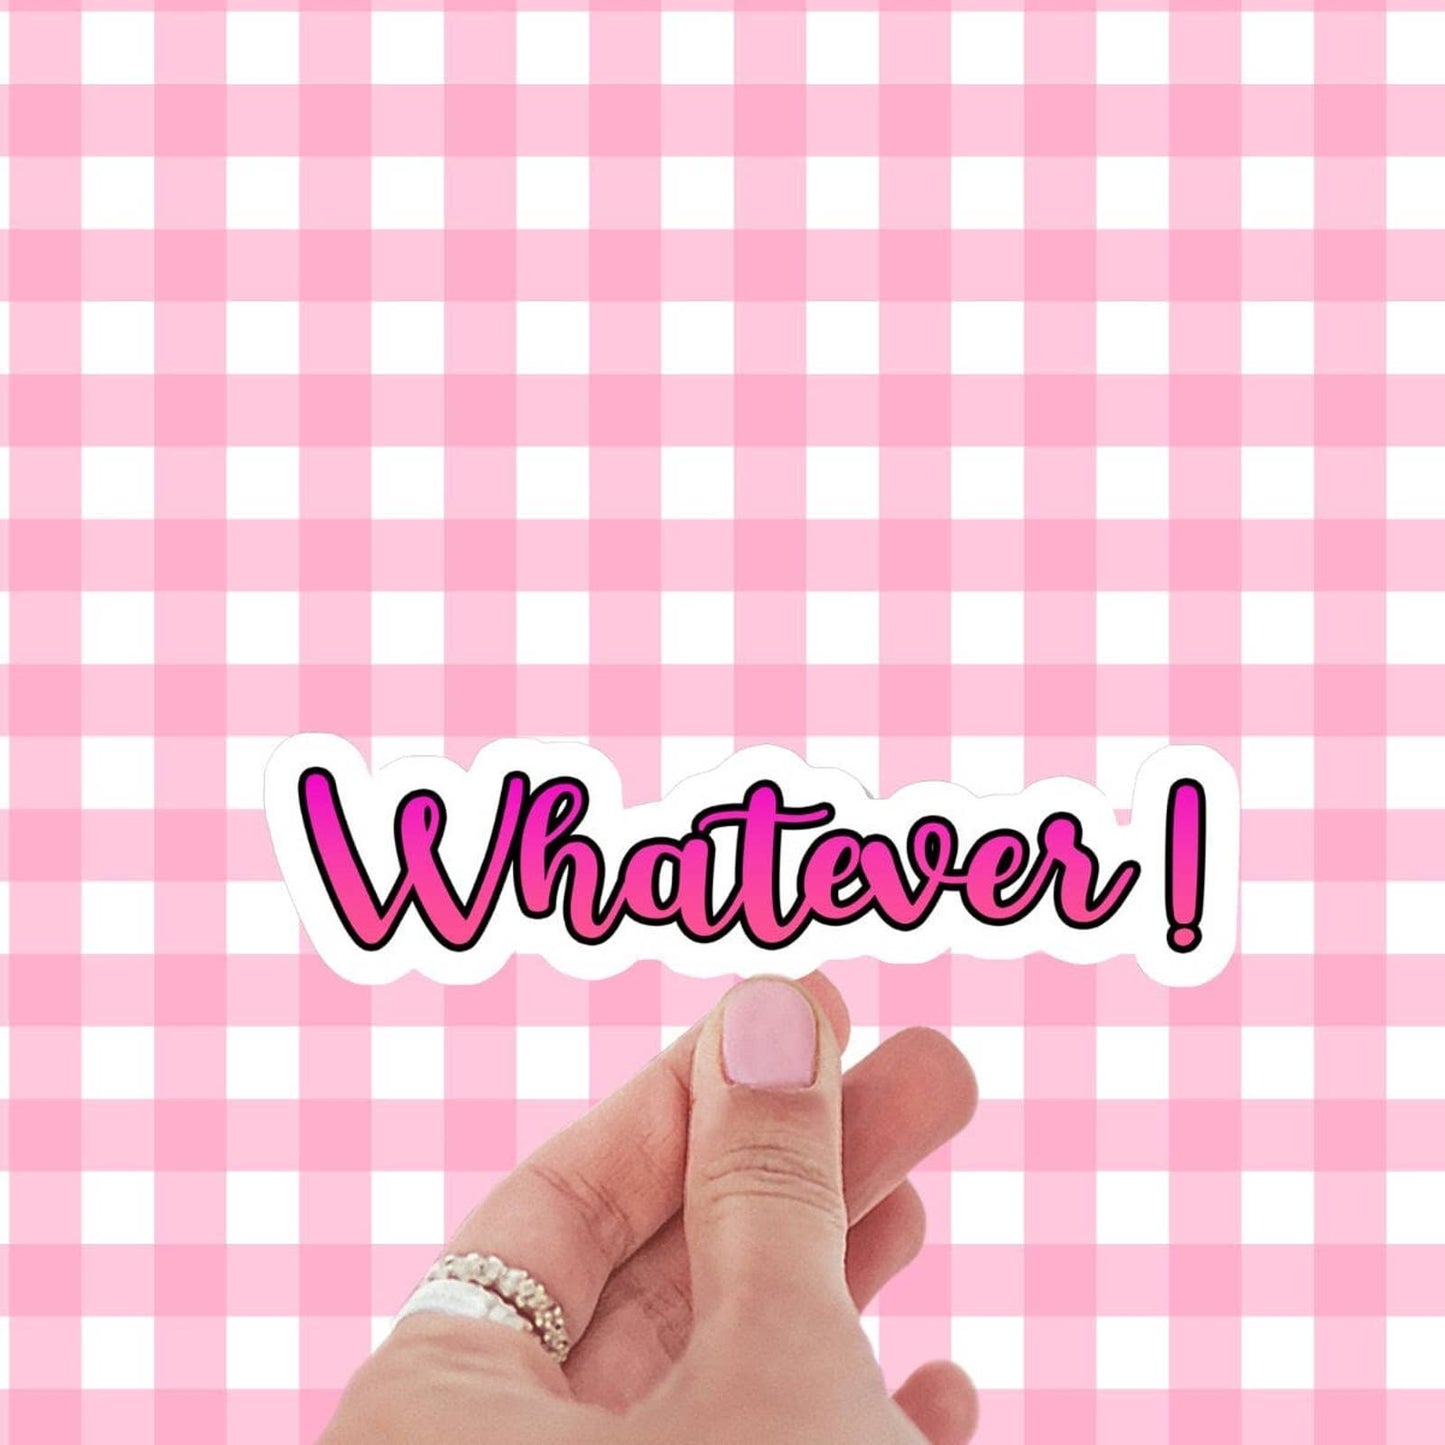 Whatever sticker, funny stickers, stickers for laptop, stickers for book, 90s stickers, water bottle stickers, aesthetic